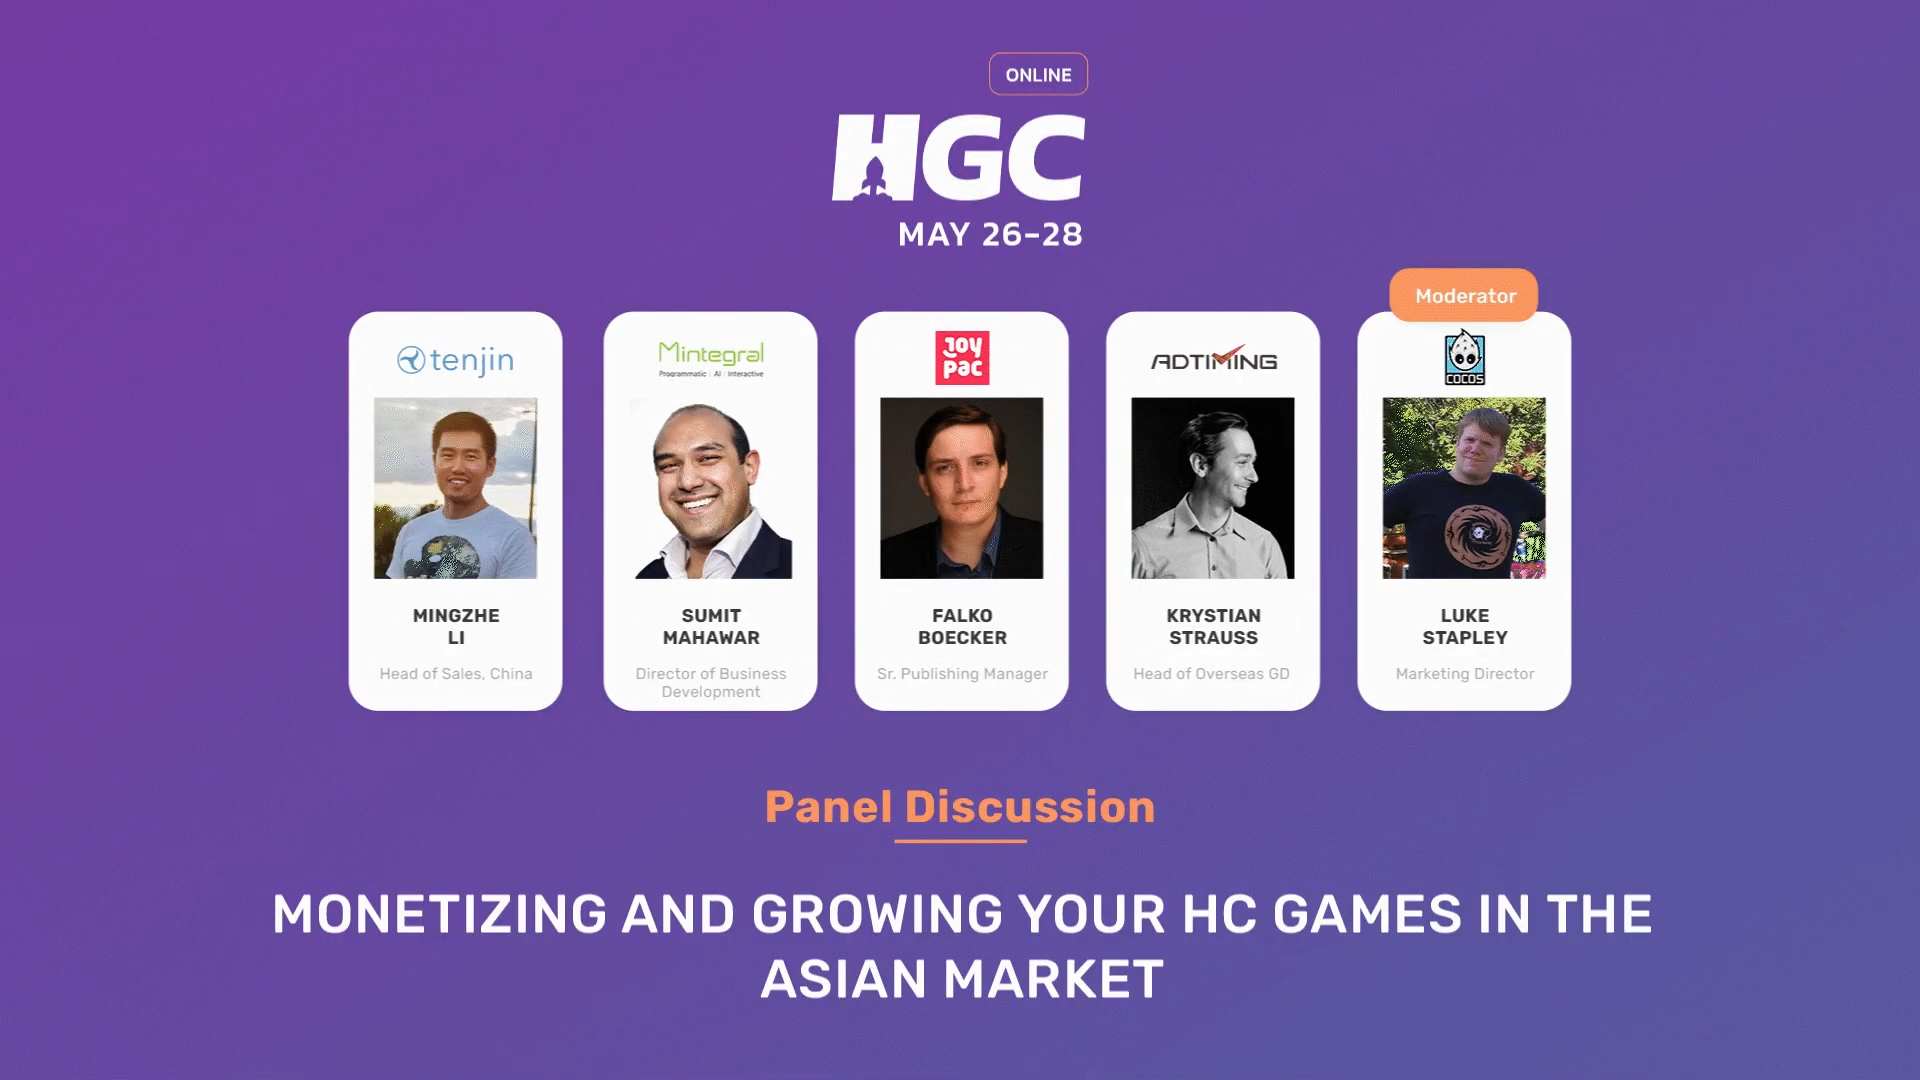 Monetizing and growing your hyper-casual games in the Asian market